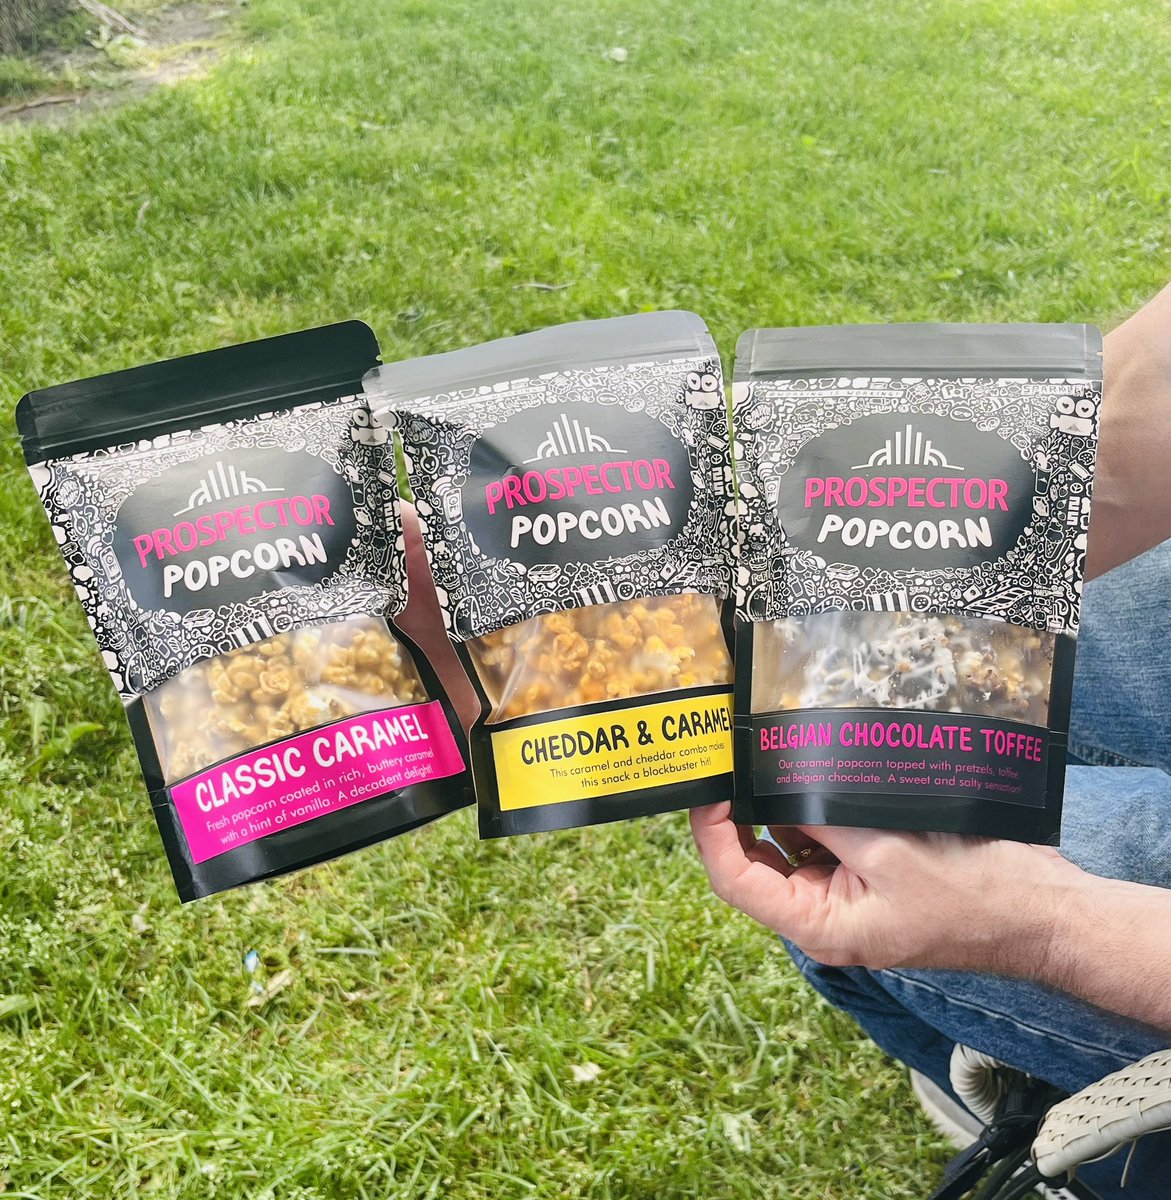 This popcorn is more than tasty. Prospector employs mostly those who identify as disabled at competitive wages. 

@ProspectorPopcorn #disability #disabled #disabledemployment #popcorn #accessibility